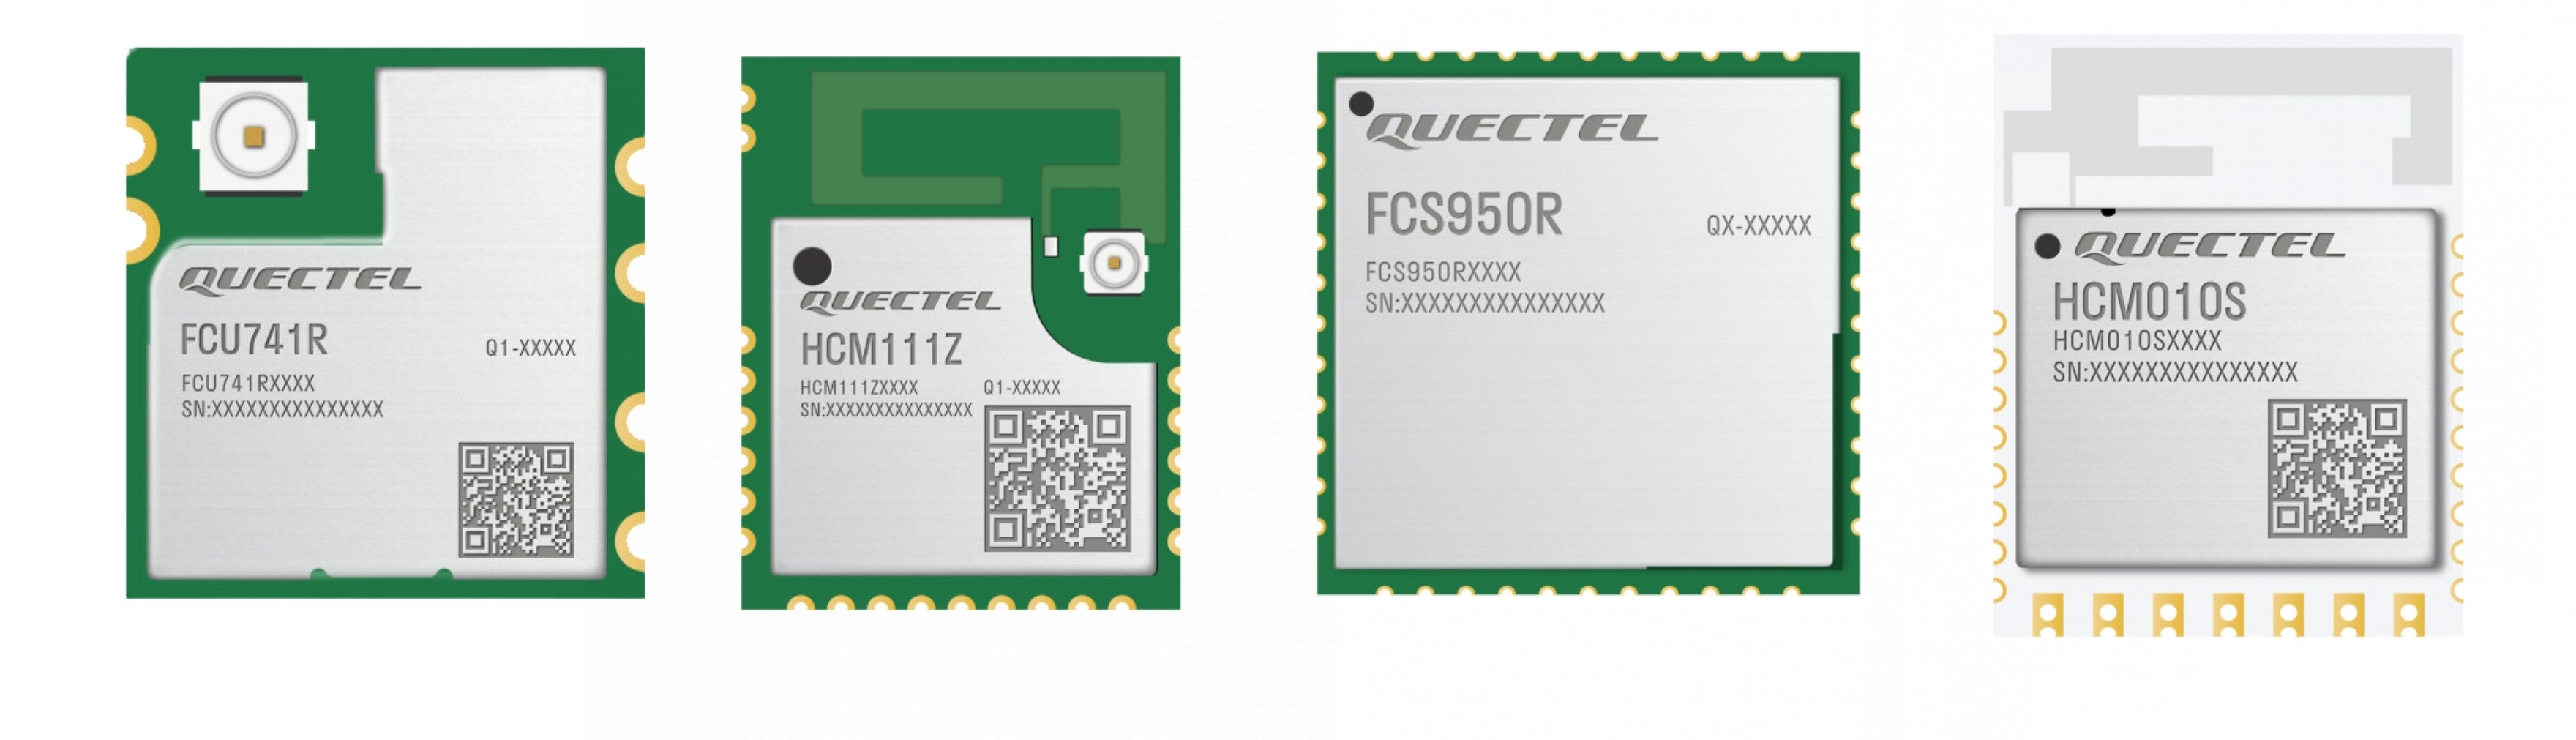 Quectel Introduces New Wireless and Bluetooth Modules That Are Compact, Low-Power, and High-Performance.